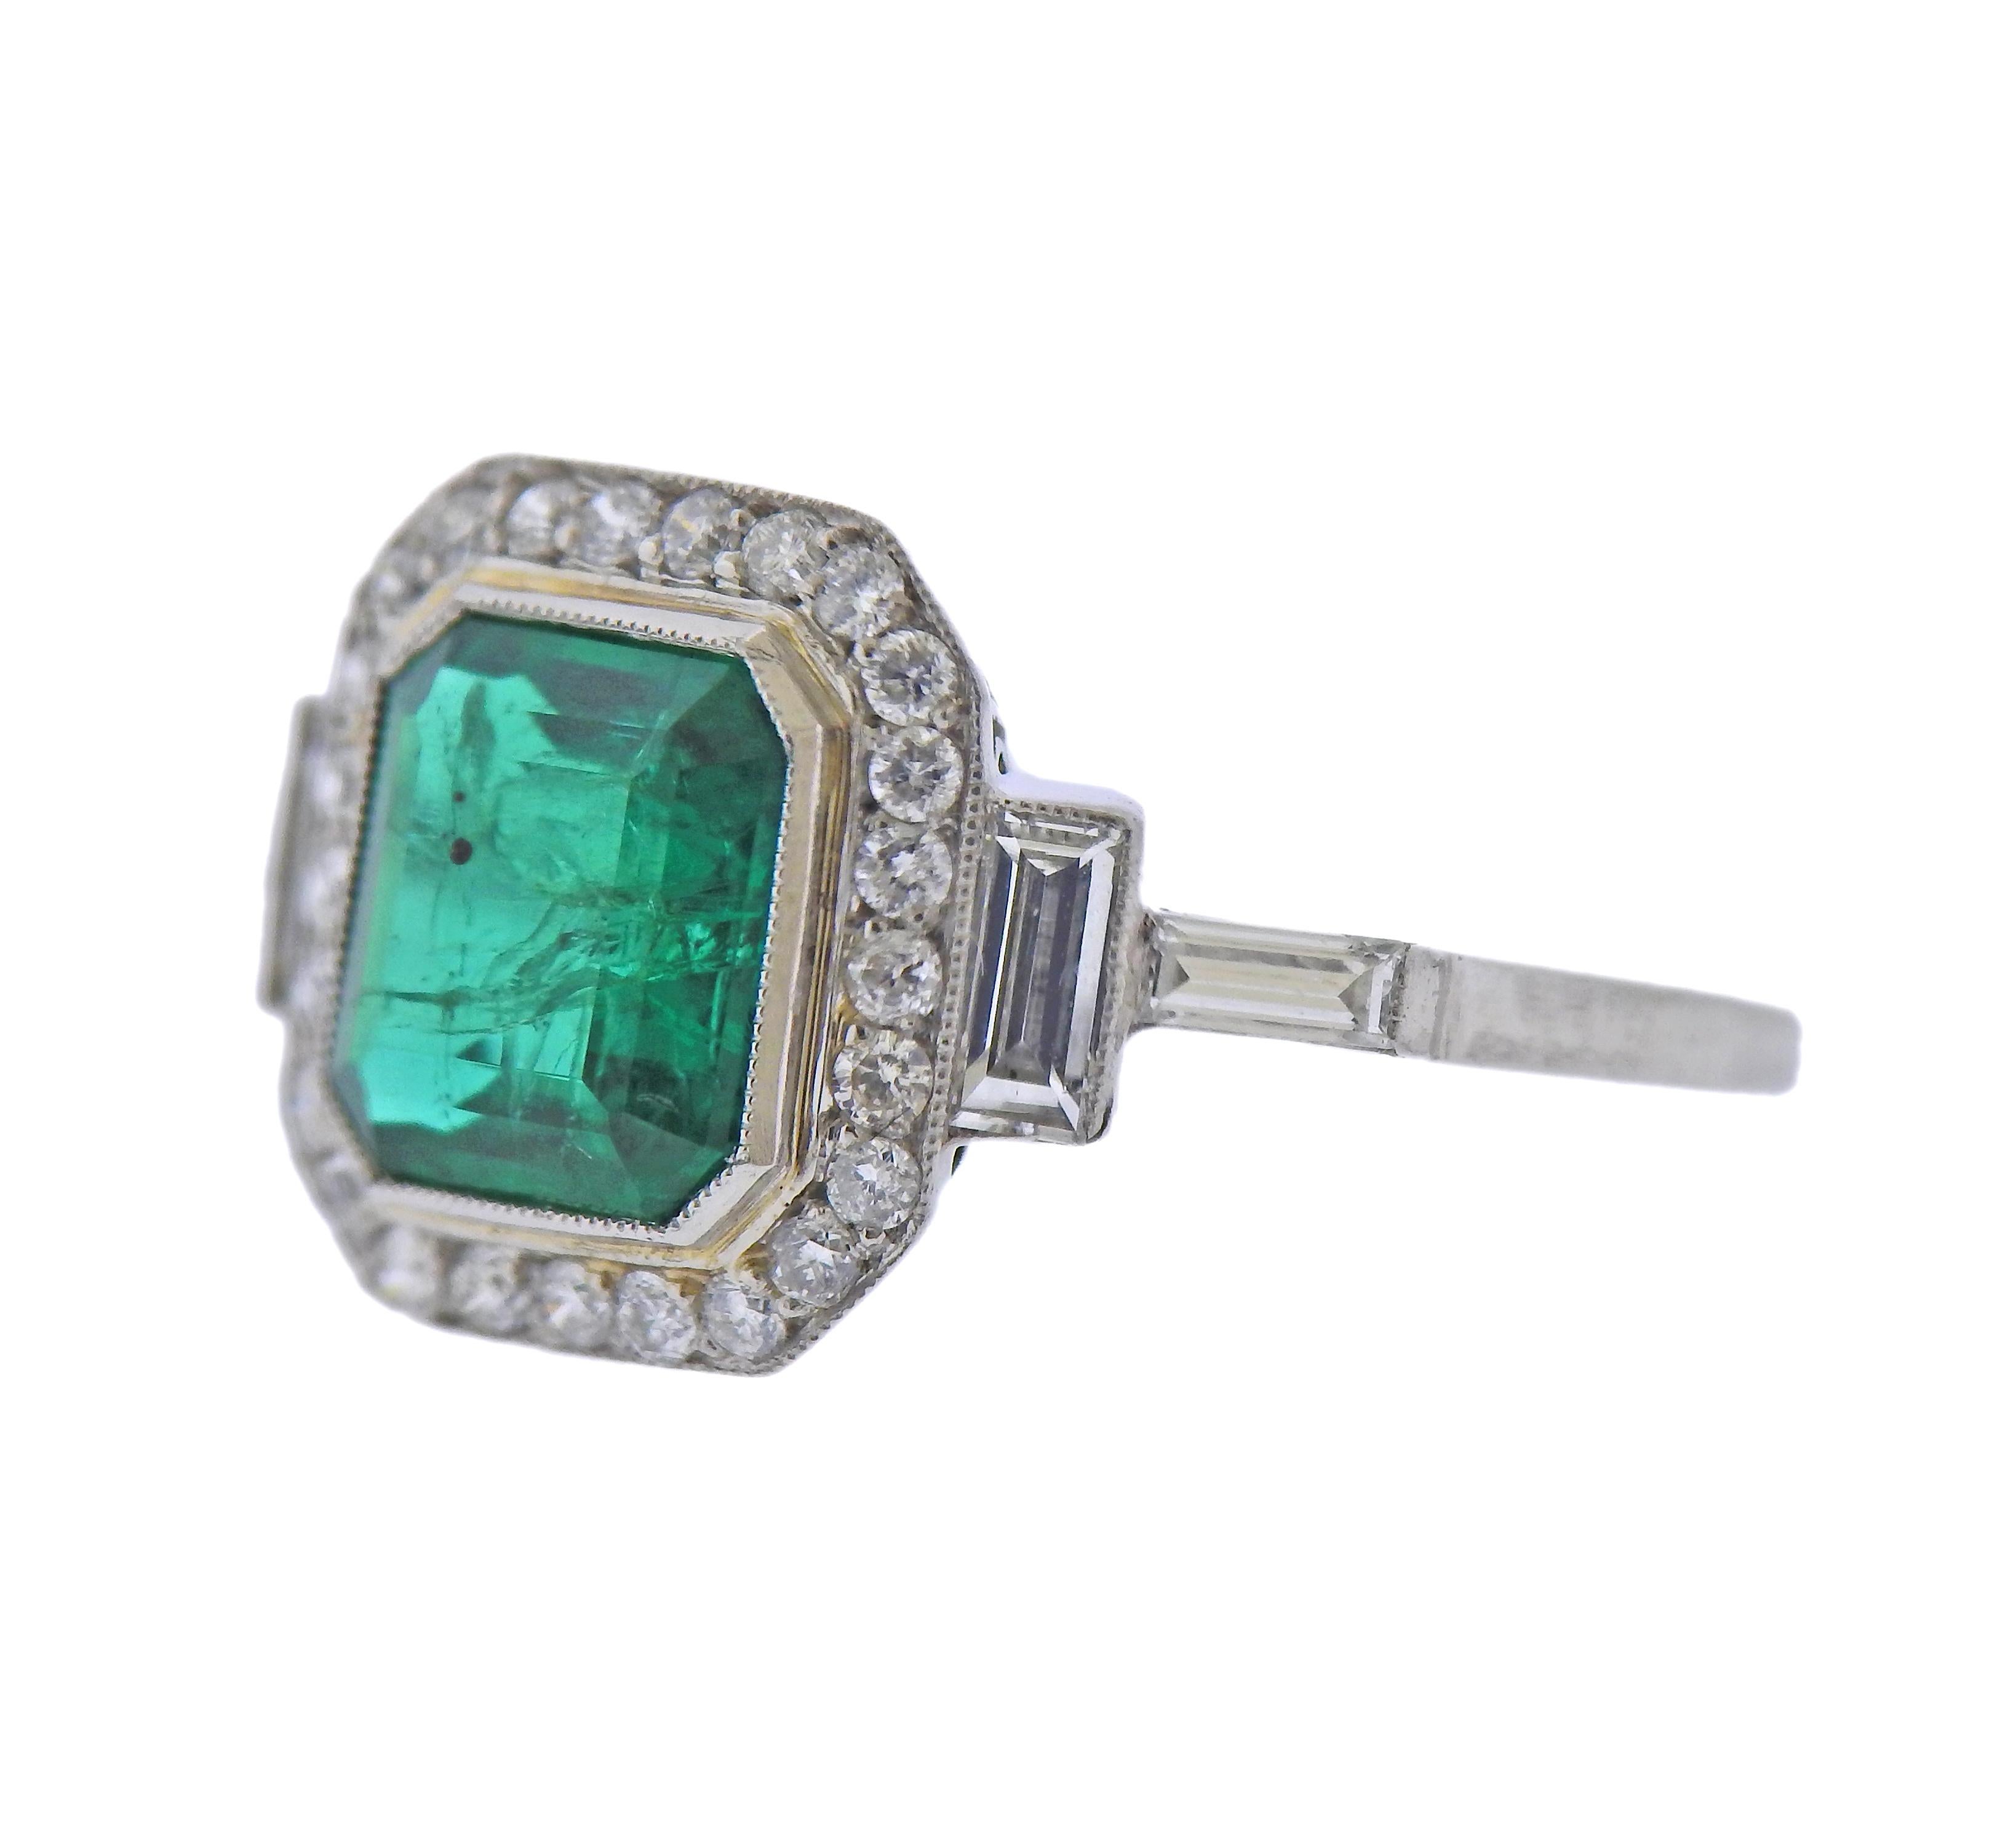 Platinum ring, set with an approx. 1.57ct emerald, and approx. 0.44ctw in diamonds. Ring size - 6.5, ring top - 13mm x 20mm. Tested plat. Weight - 3.7 grams.